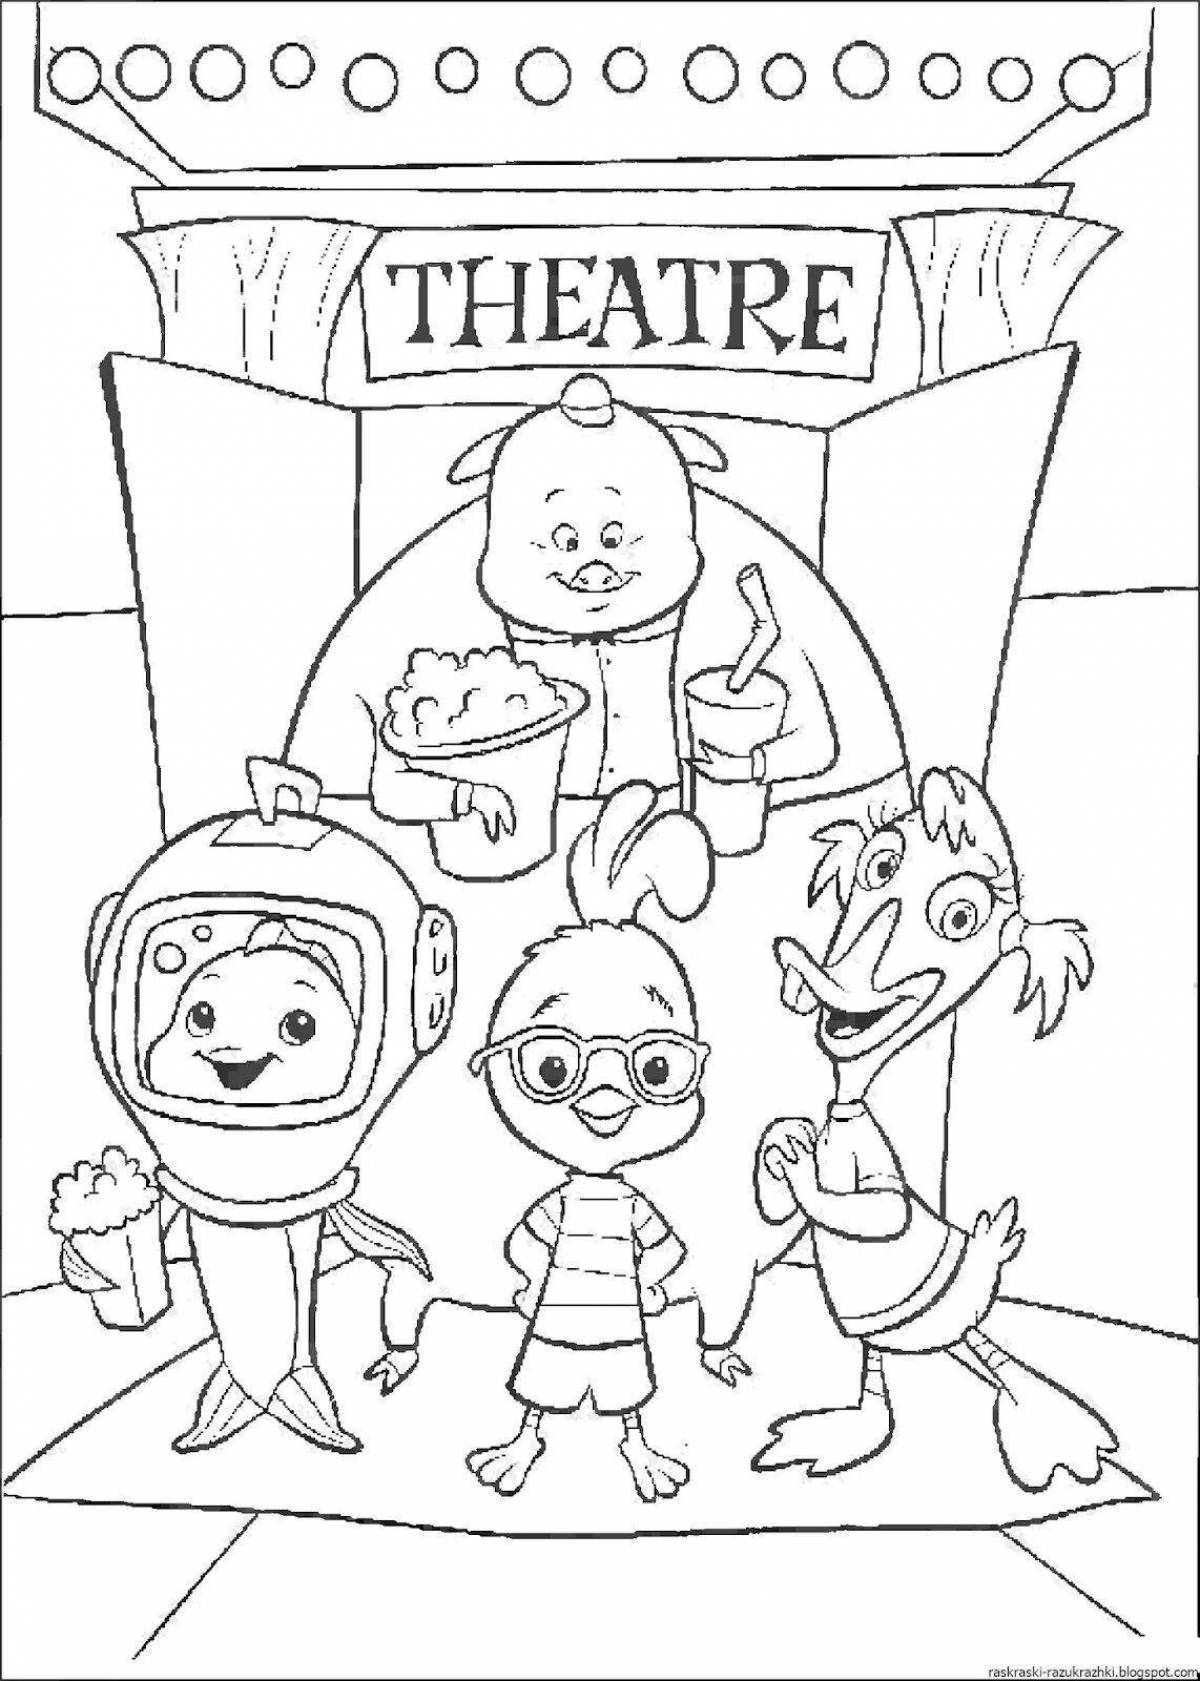 Coloring book outstanding puppet theater